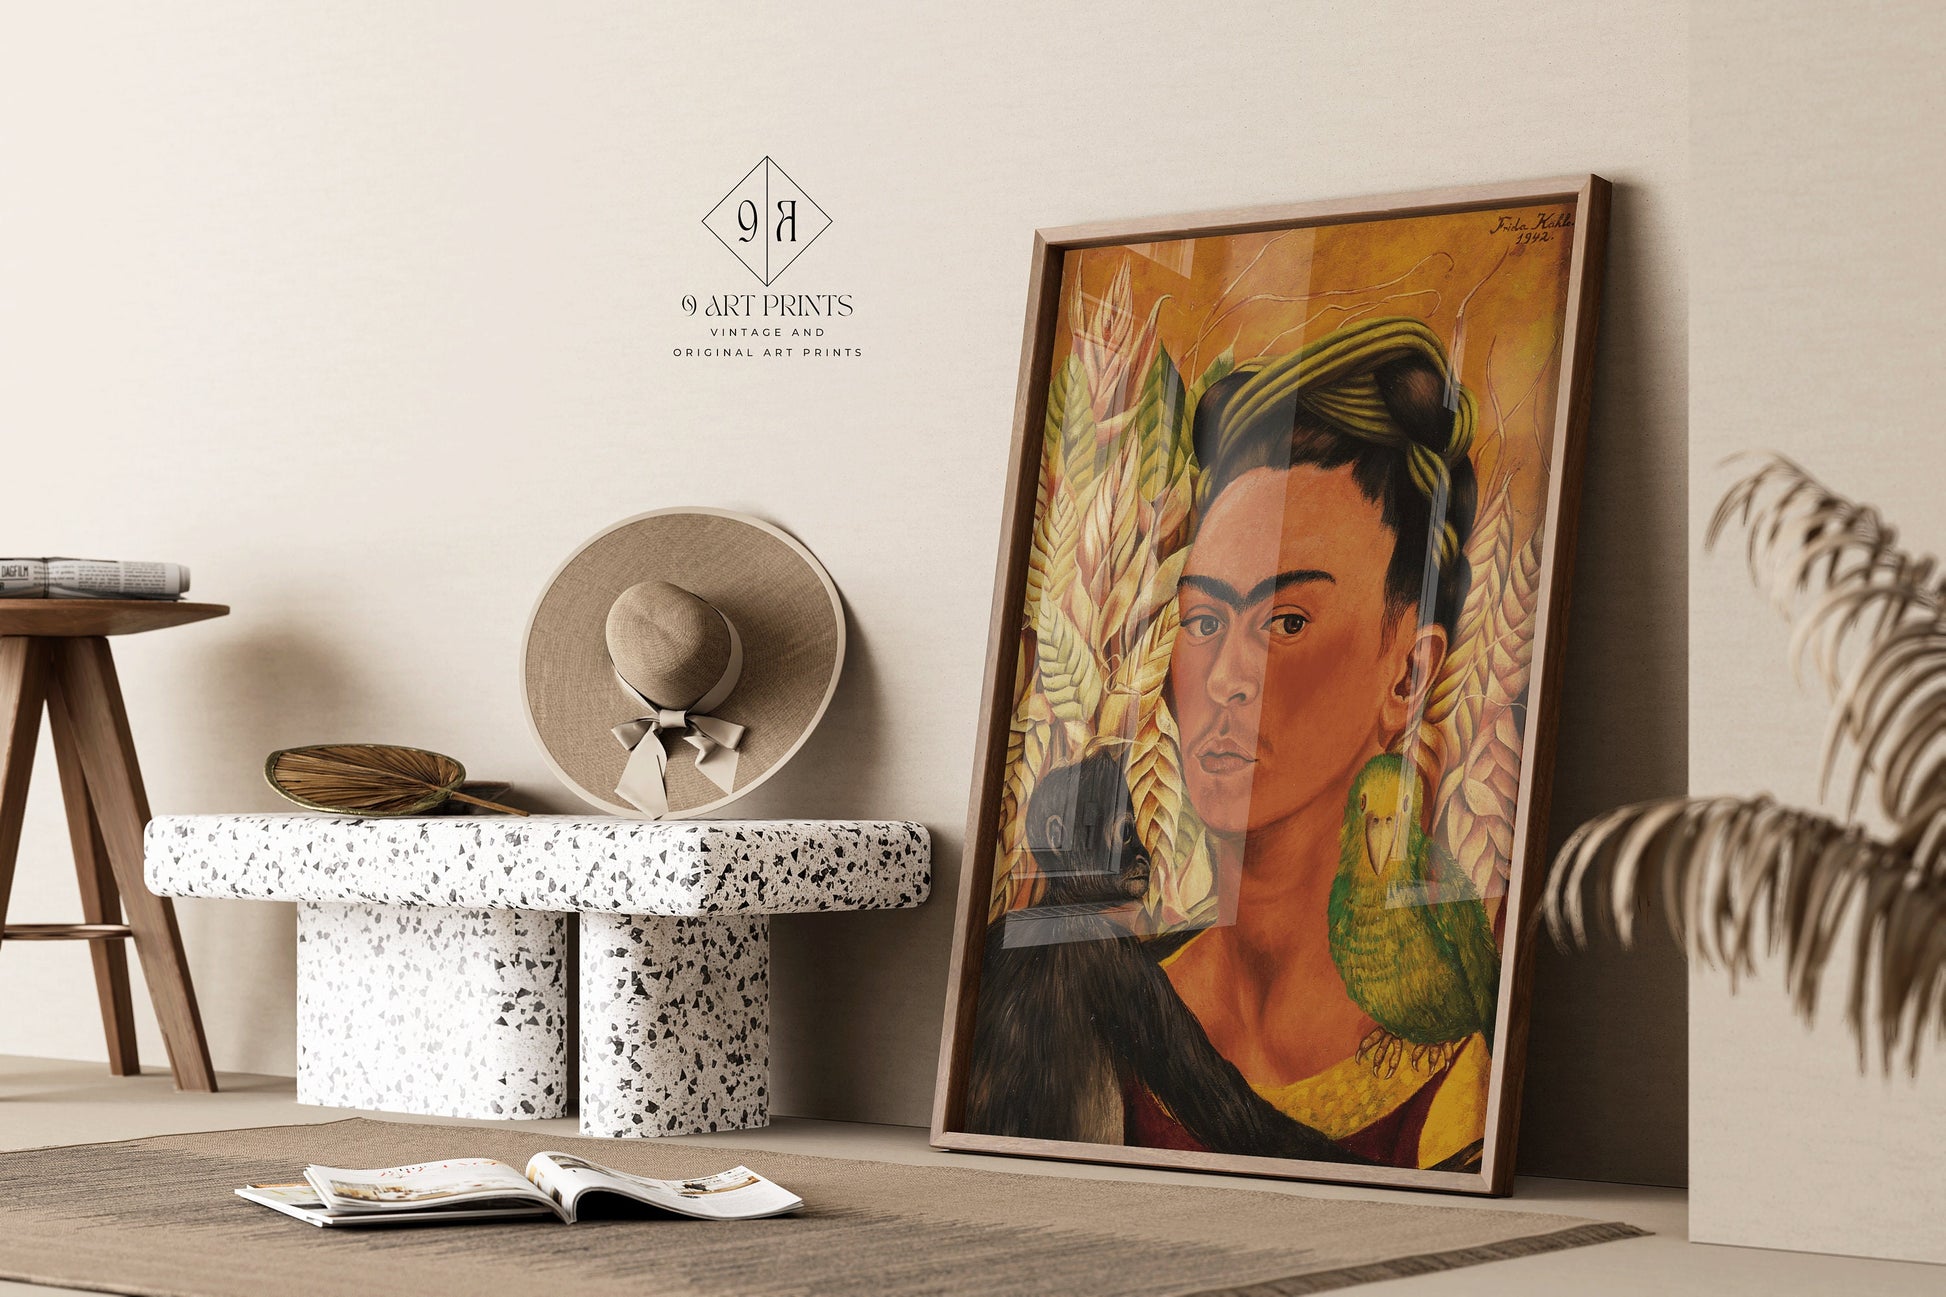 Frida Kahlo Self Portrait with Monkey Art Print Exhibition Poster Portrait Modern Gallery Framed Ready to Hang Home Office Decor Gift Idea